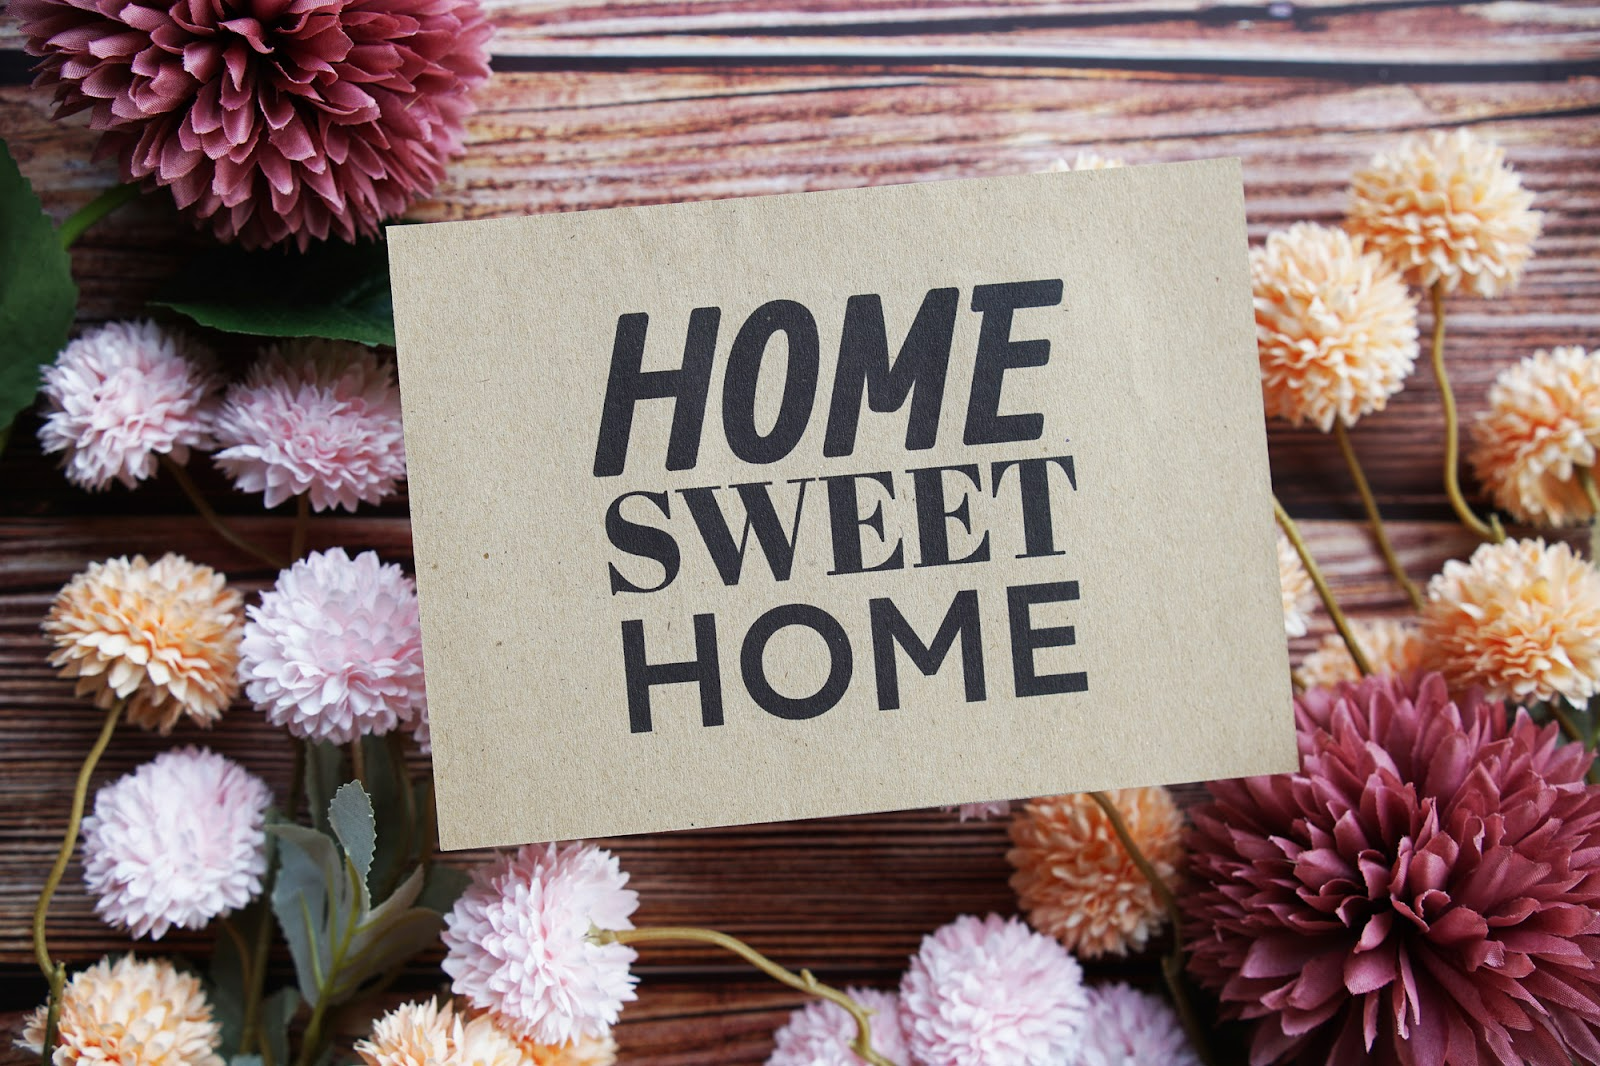 Flowers surround a sign that reads “home sweet home.”